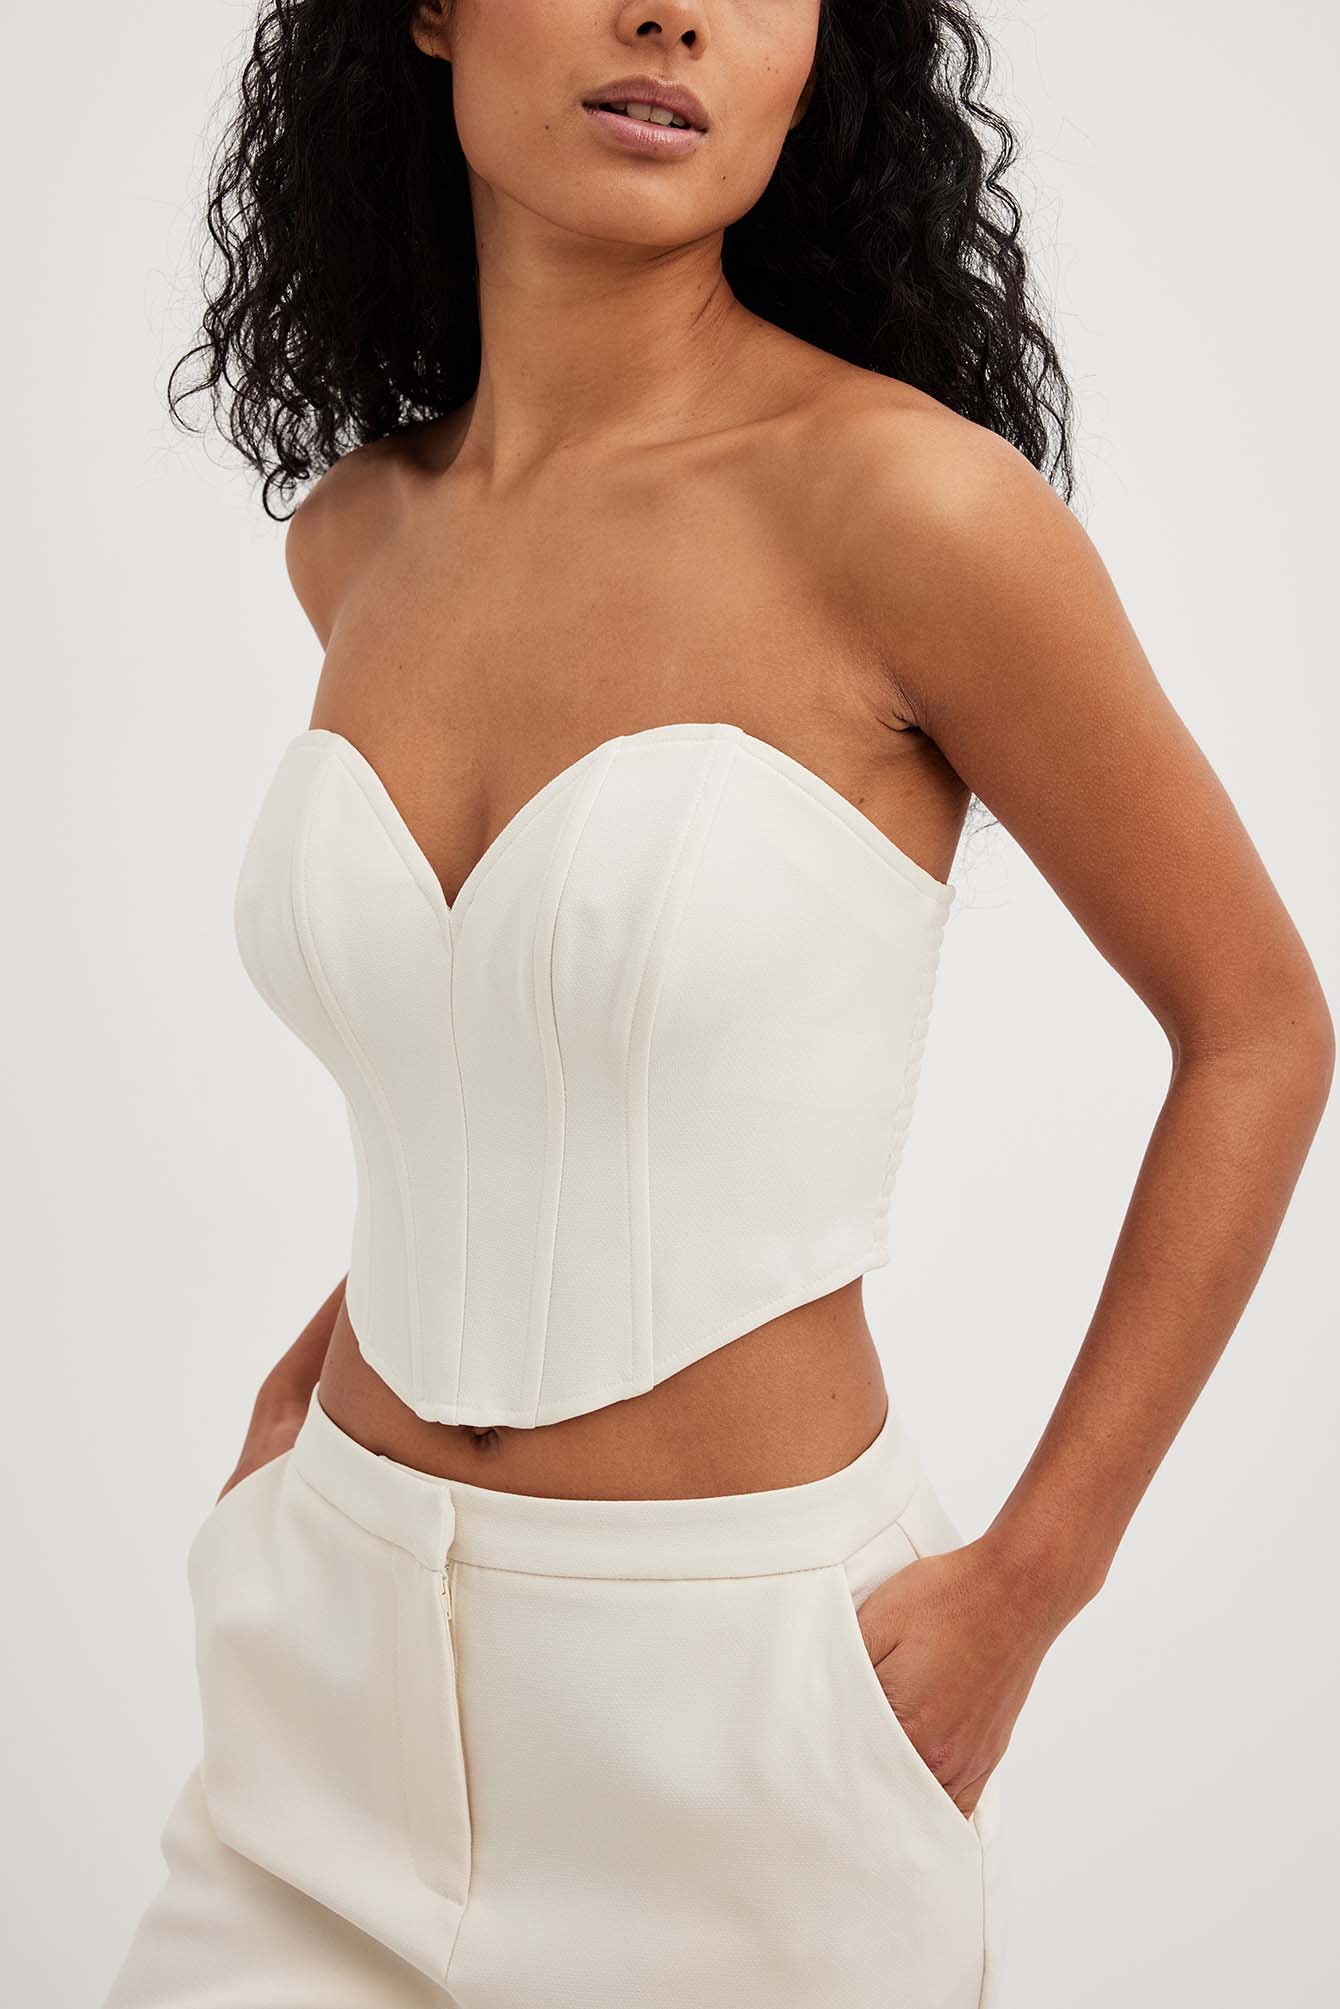 A heart shape corset top is everything